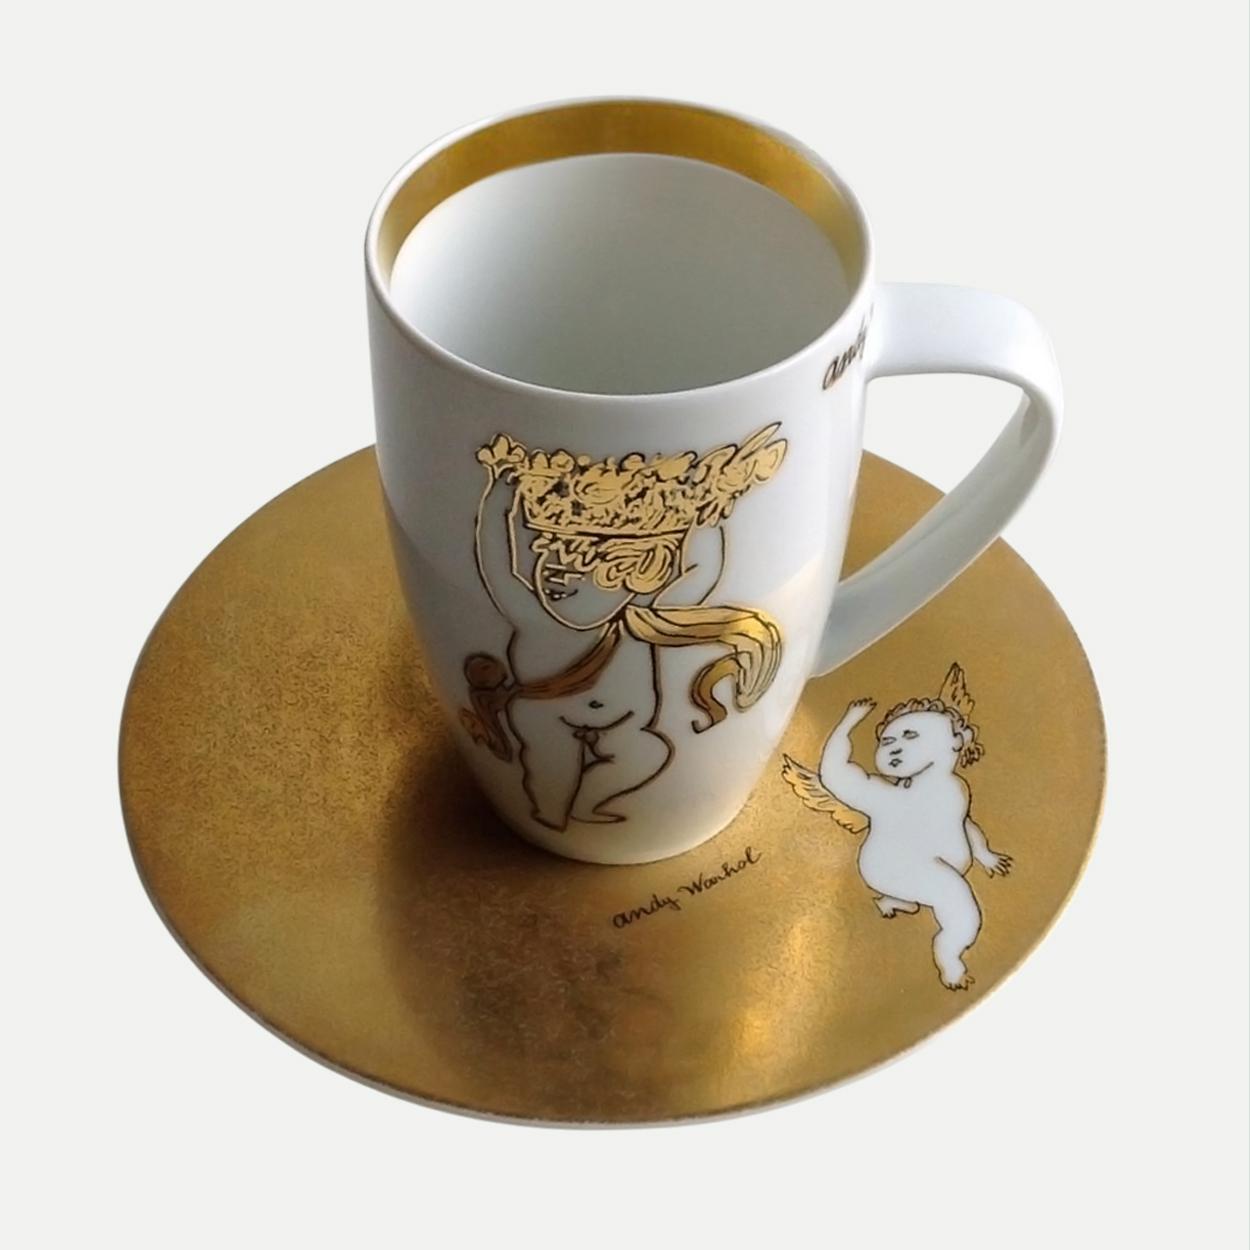 Rosenthal cup and saucer set of 2. Andy Warhol Collection-Studio Line, Golden Angels

Measures: Cup H 10.2 cm, Ø 6.8 cm saucer Ø 16 cm, H 2 cm

Never used. In original box.